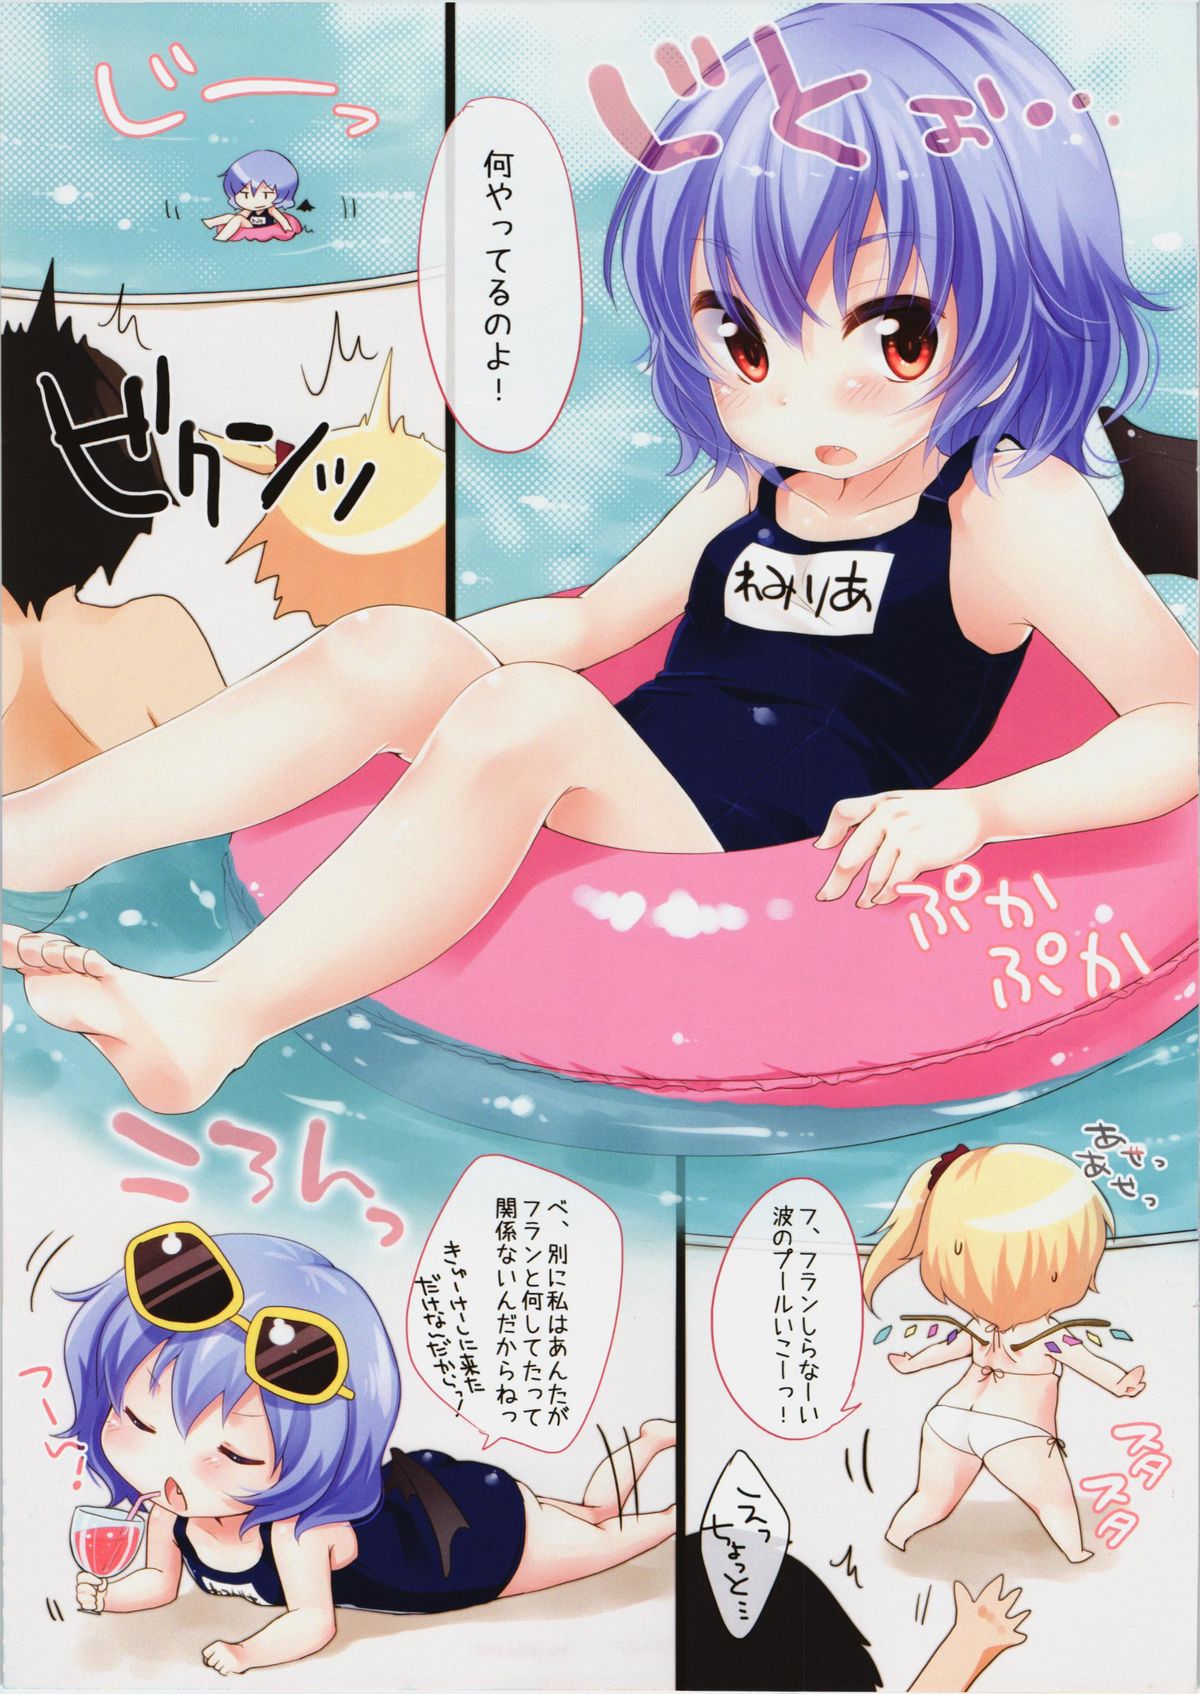 (C82) [MeltdoWN COmet (Yukiu Con)] NFRS! (Touhou Project) page 11 full